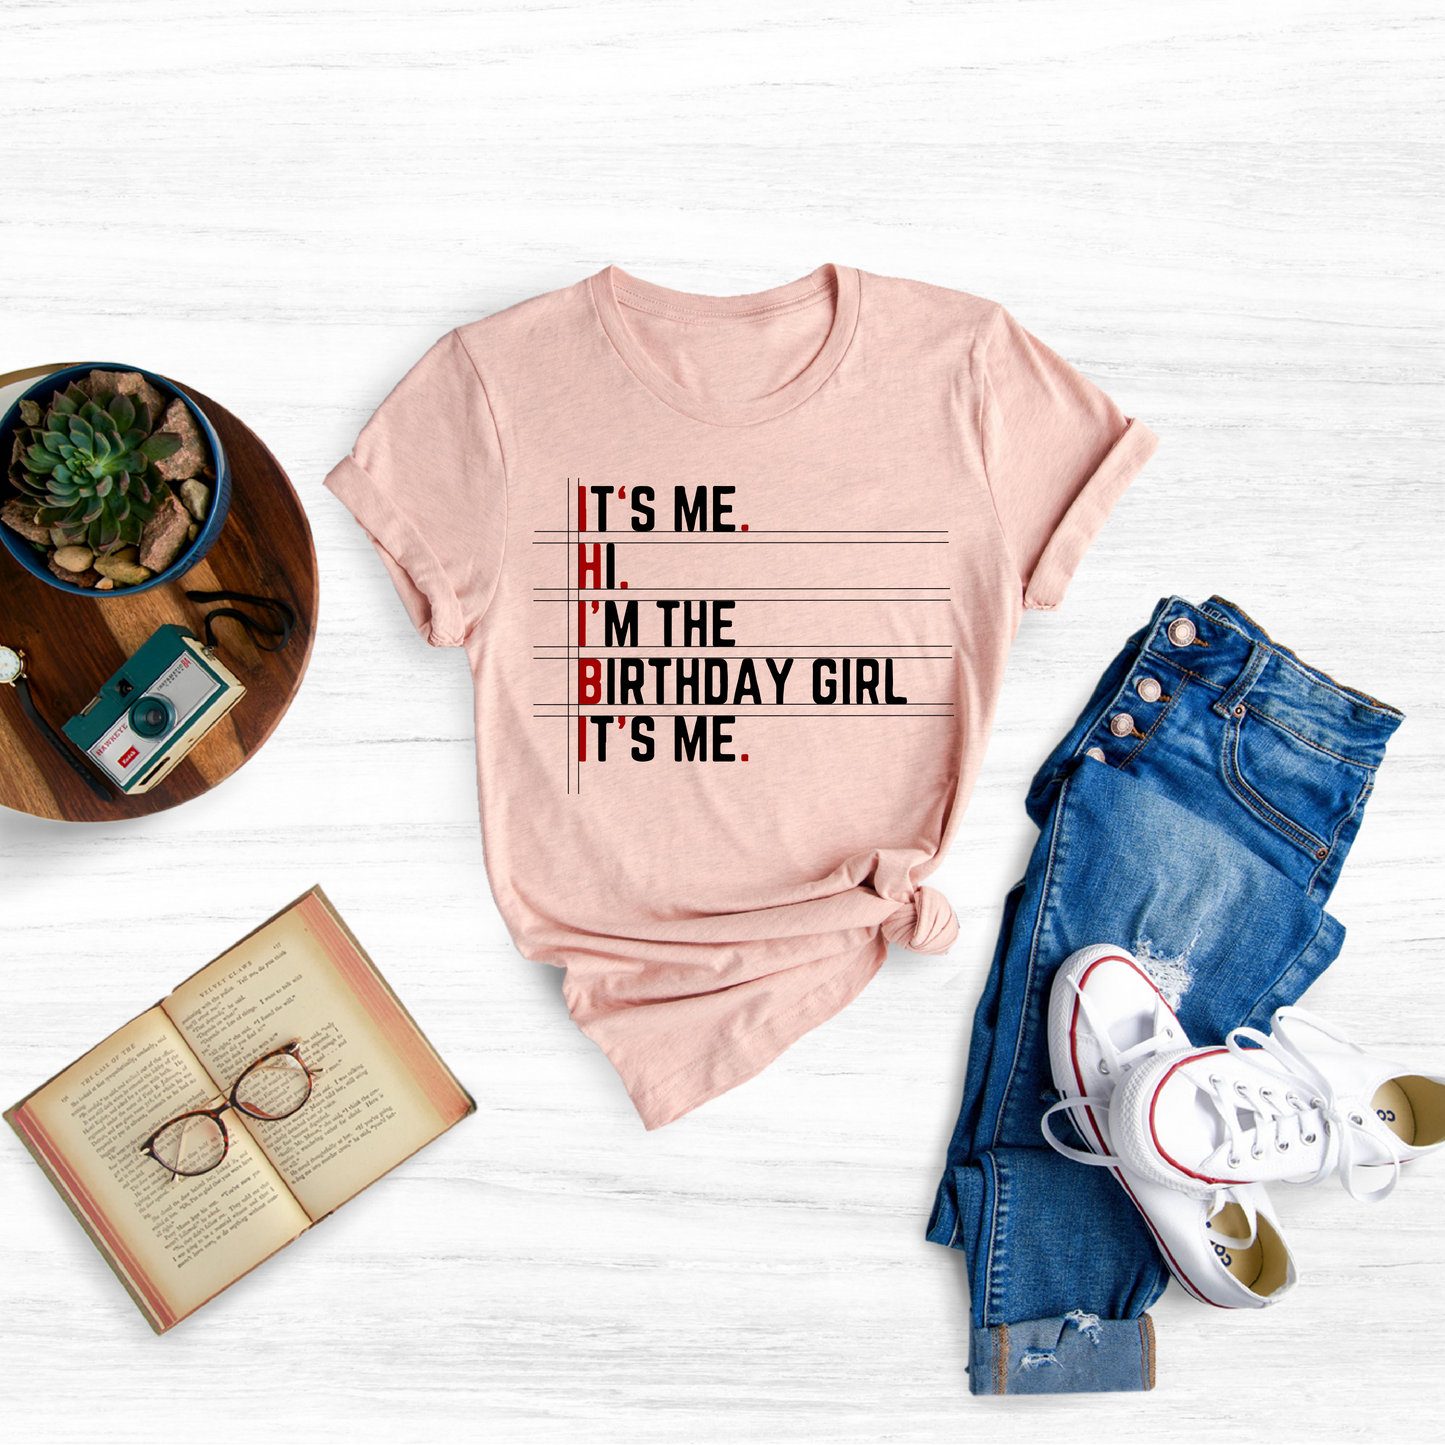 Mark your milestone with this unique and eye-catching glitter "Birthday Girl" shirt. 